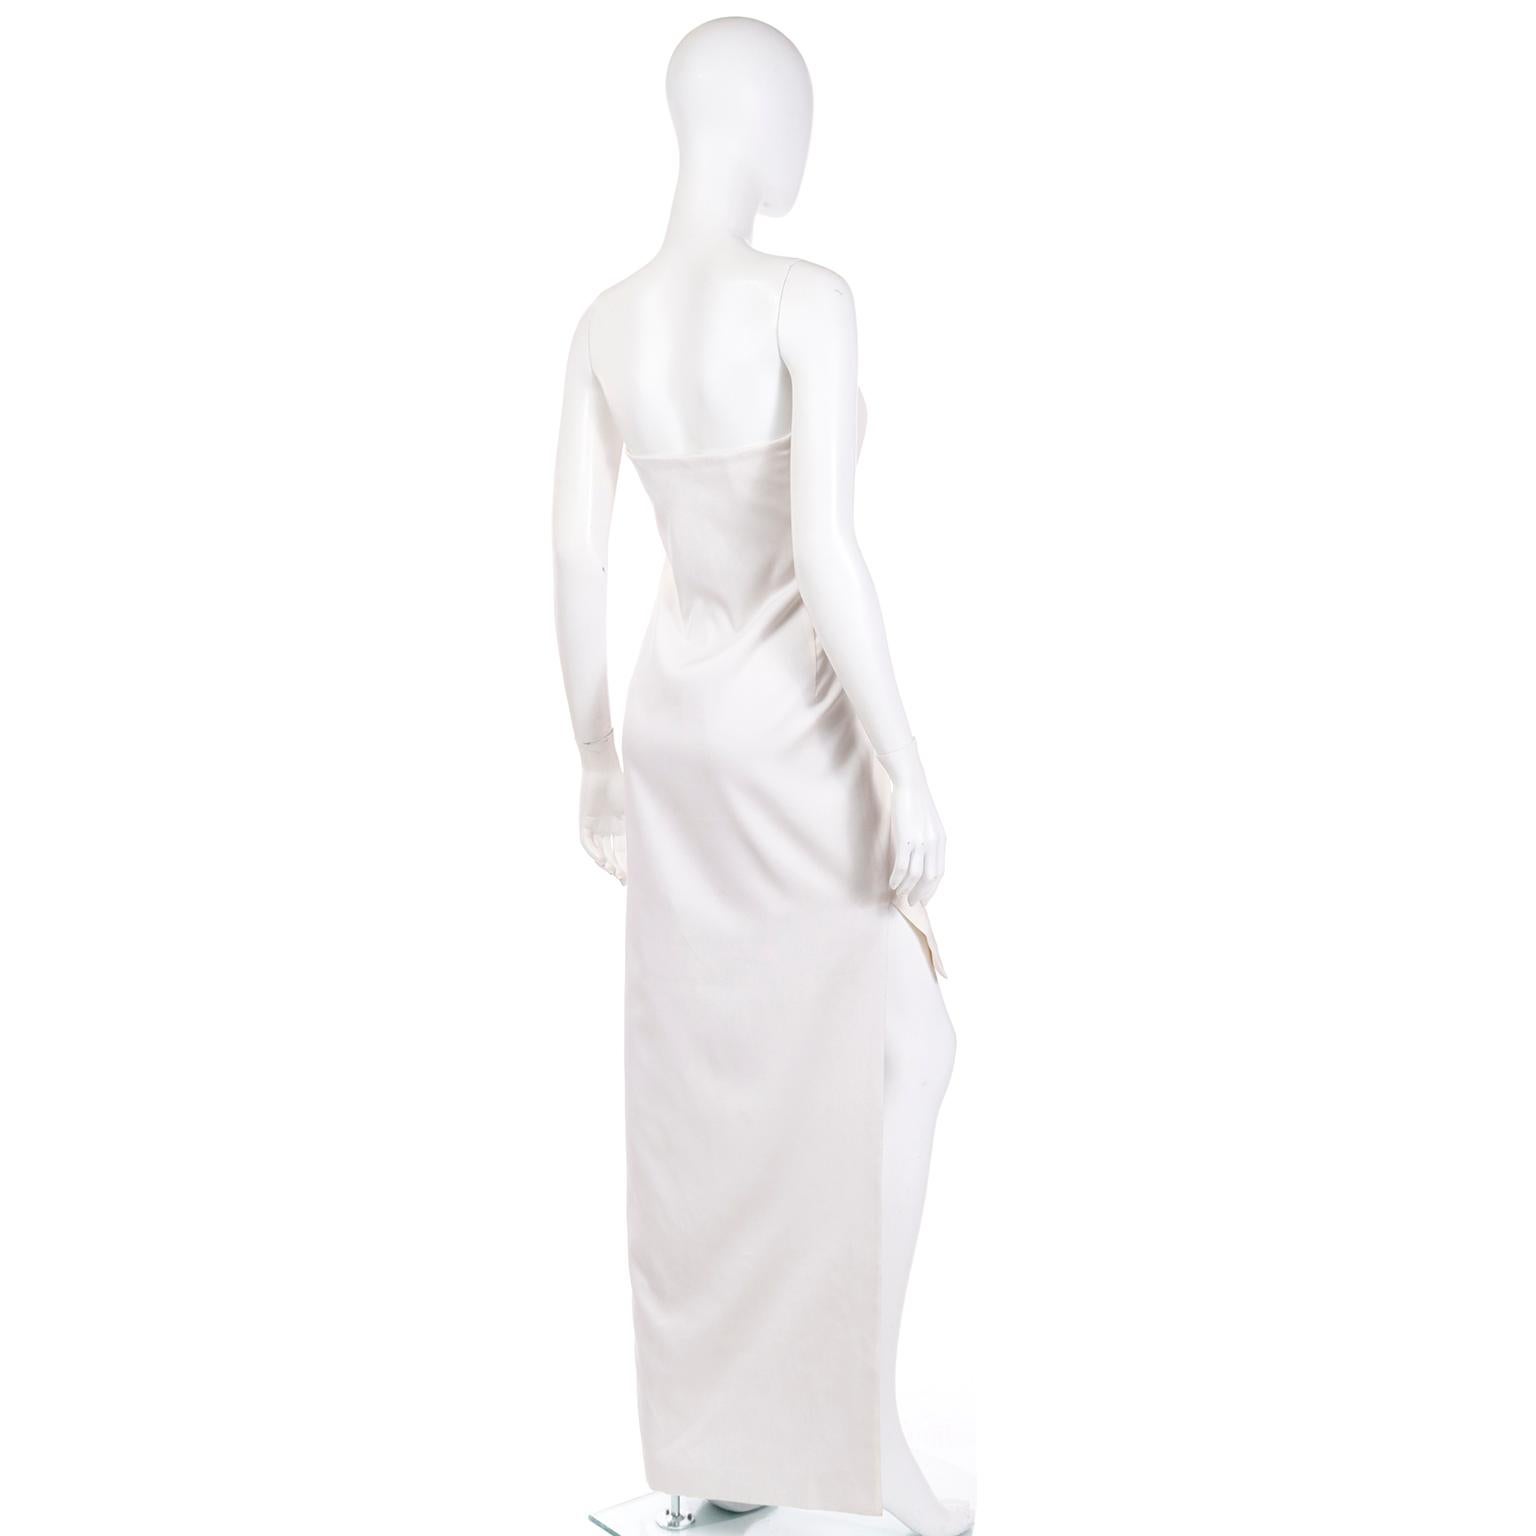 2001 Tom Ford for Yves Saint Laurent Strapless White Dress w Black Feather Train For Sale 2